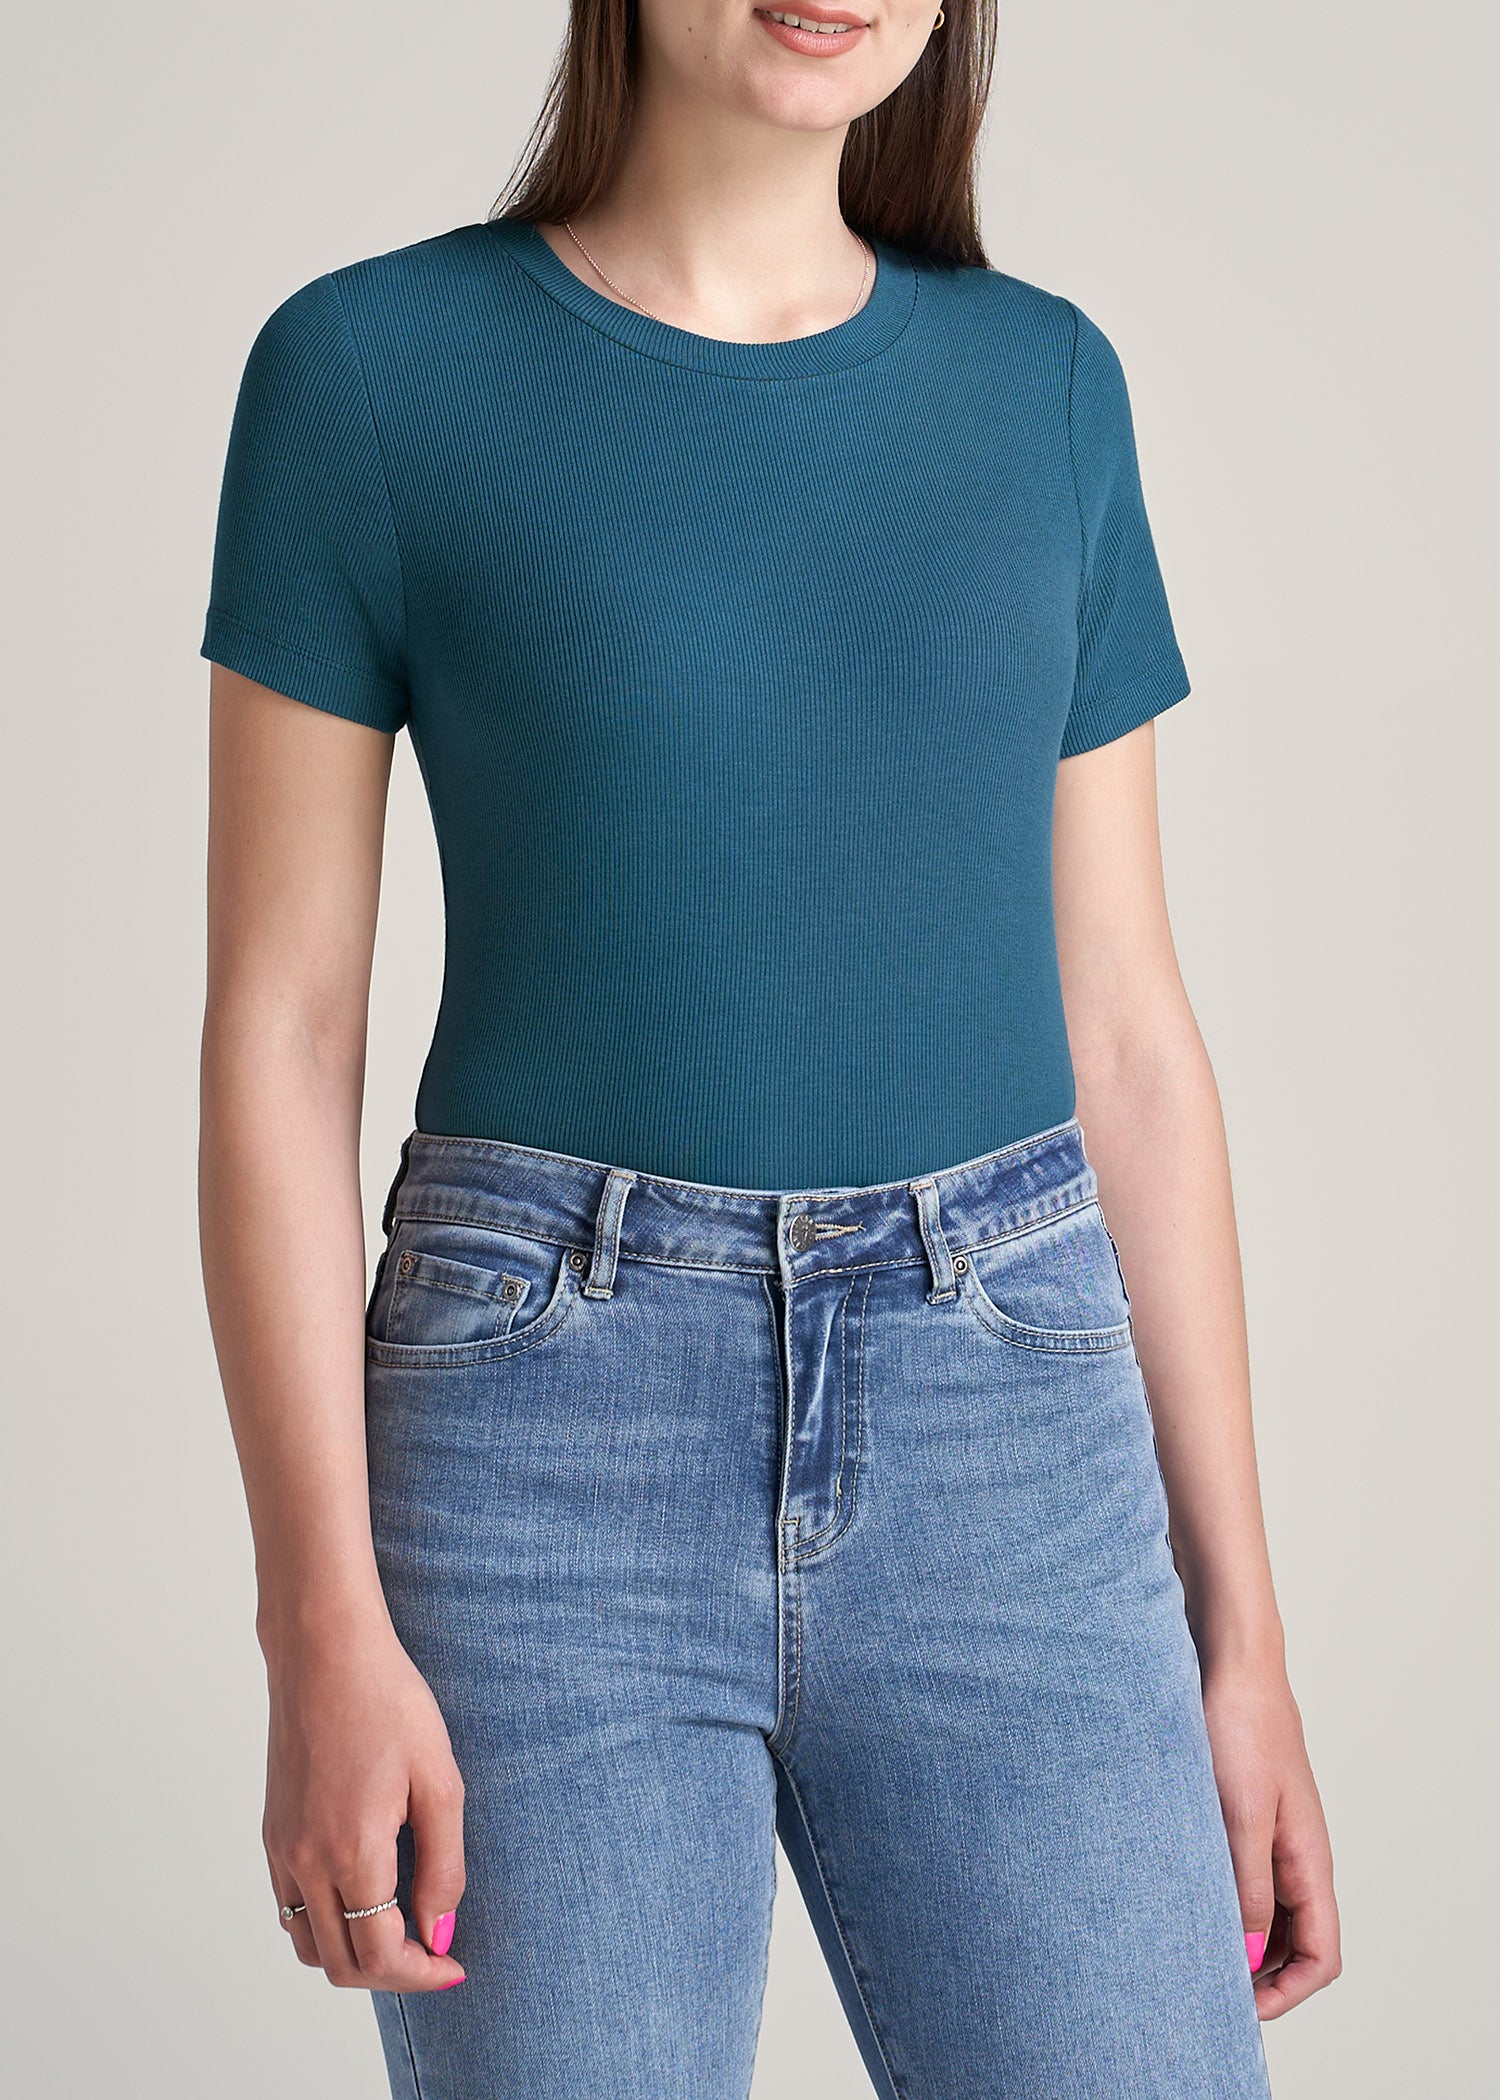 FITTED Ribbed Tee in Deep Water - Women's Tall T-Shirts